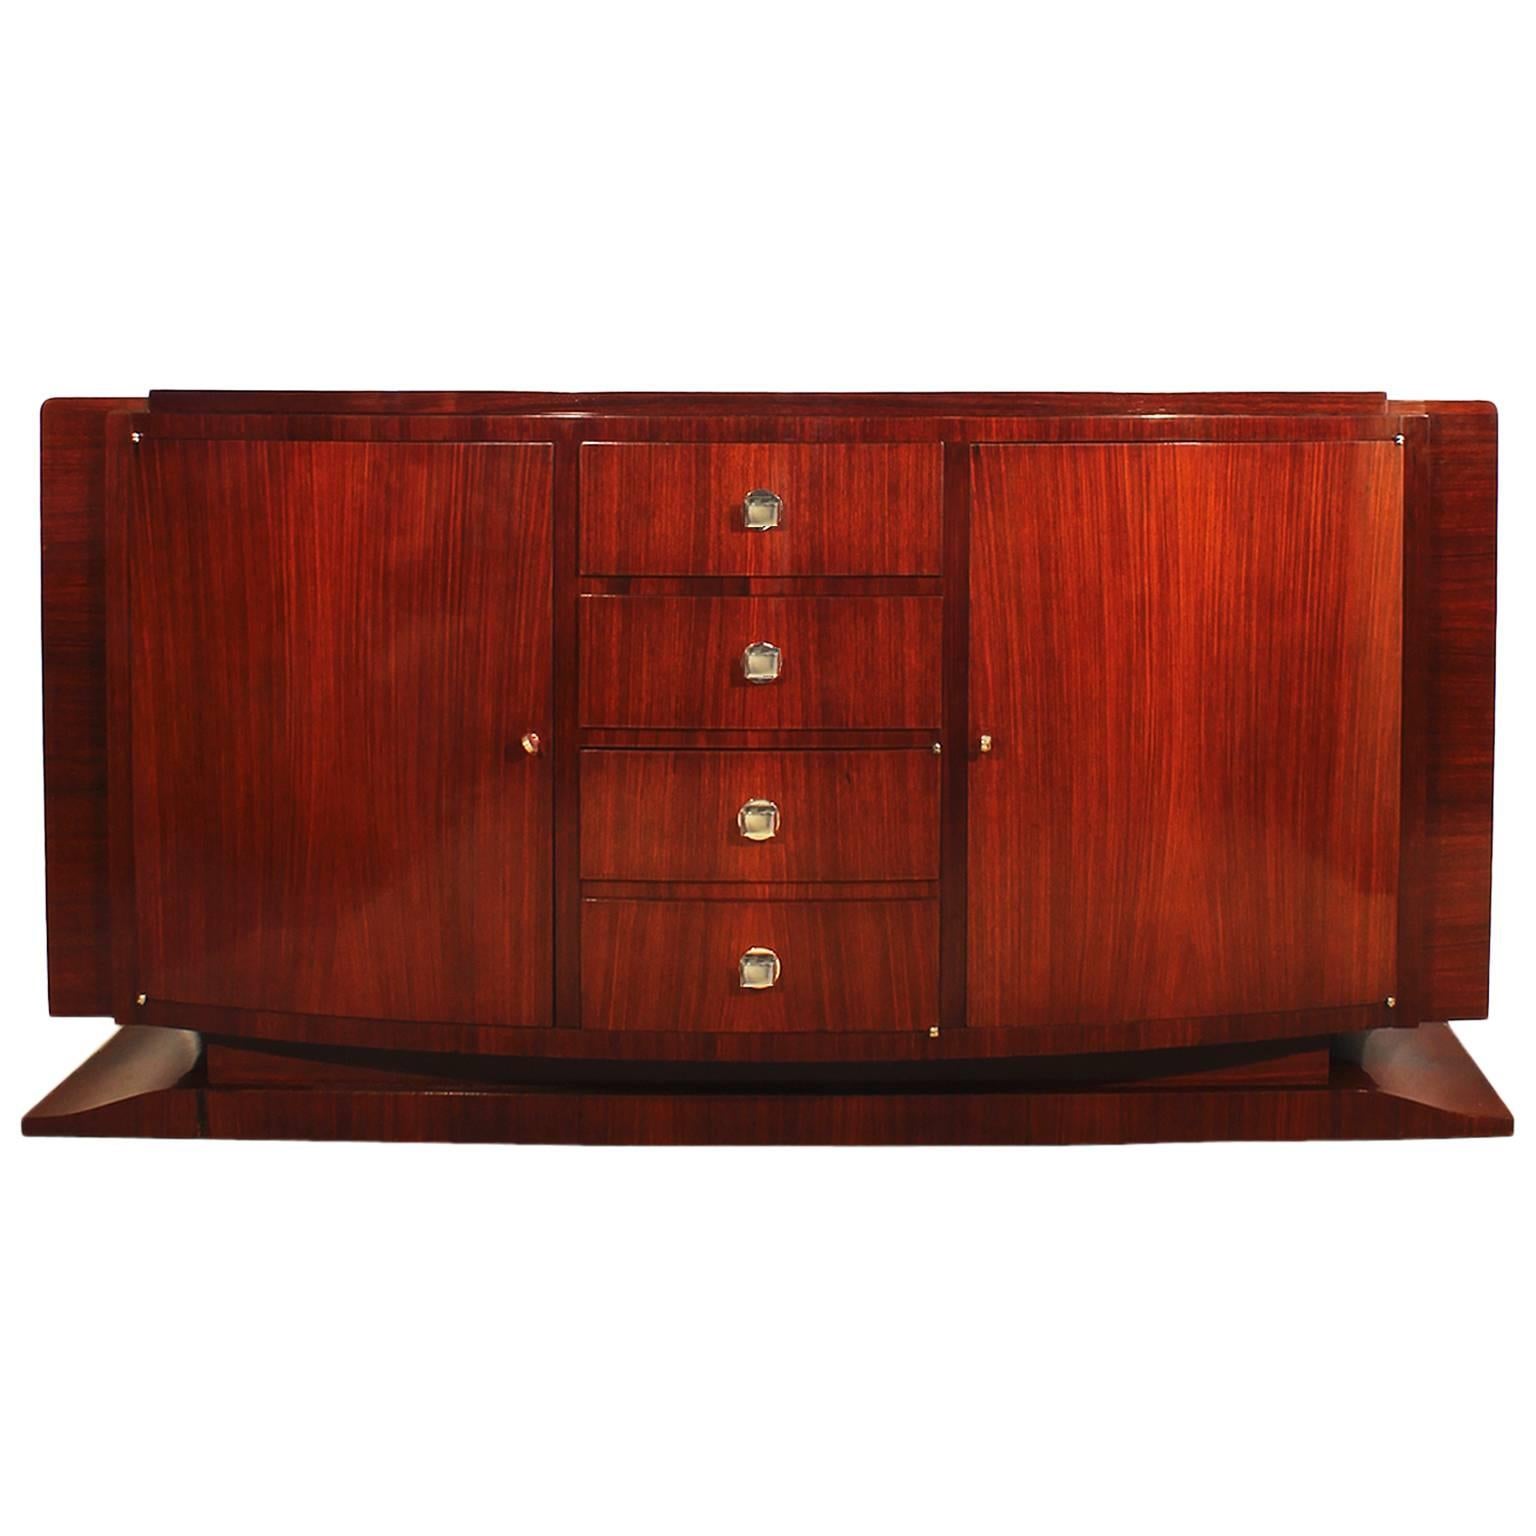 1930´s Art Deco Sideboard In Mahogany and Bronze - France For Sale